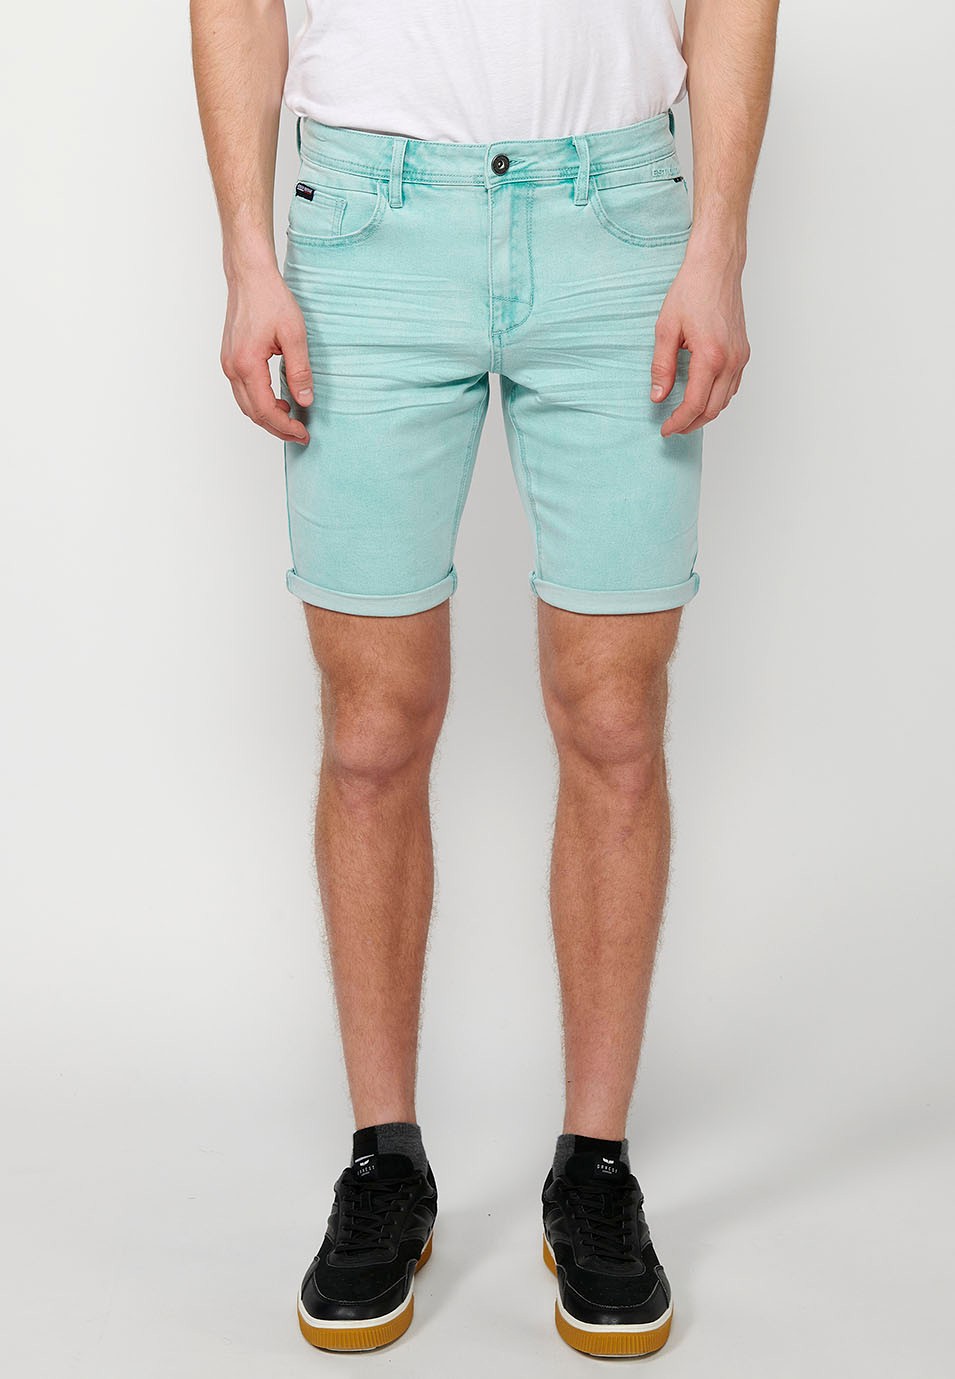 Shorts with turn-up closure with front zipper and button closure and five pockets, one blue pocket pocket for Men 1